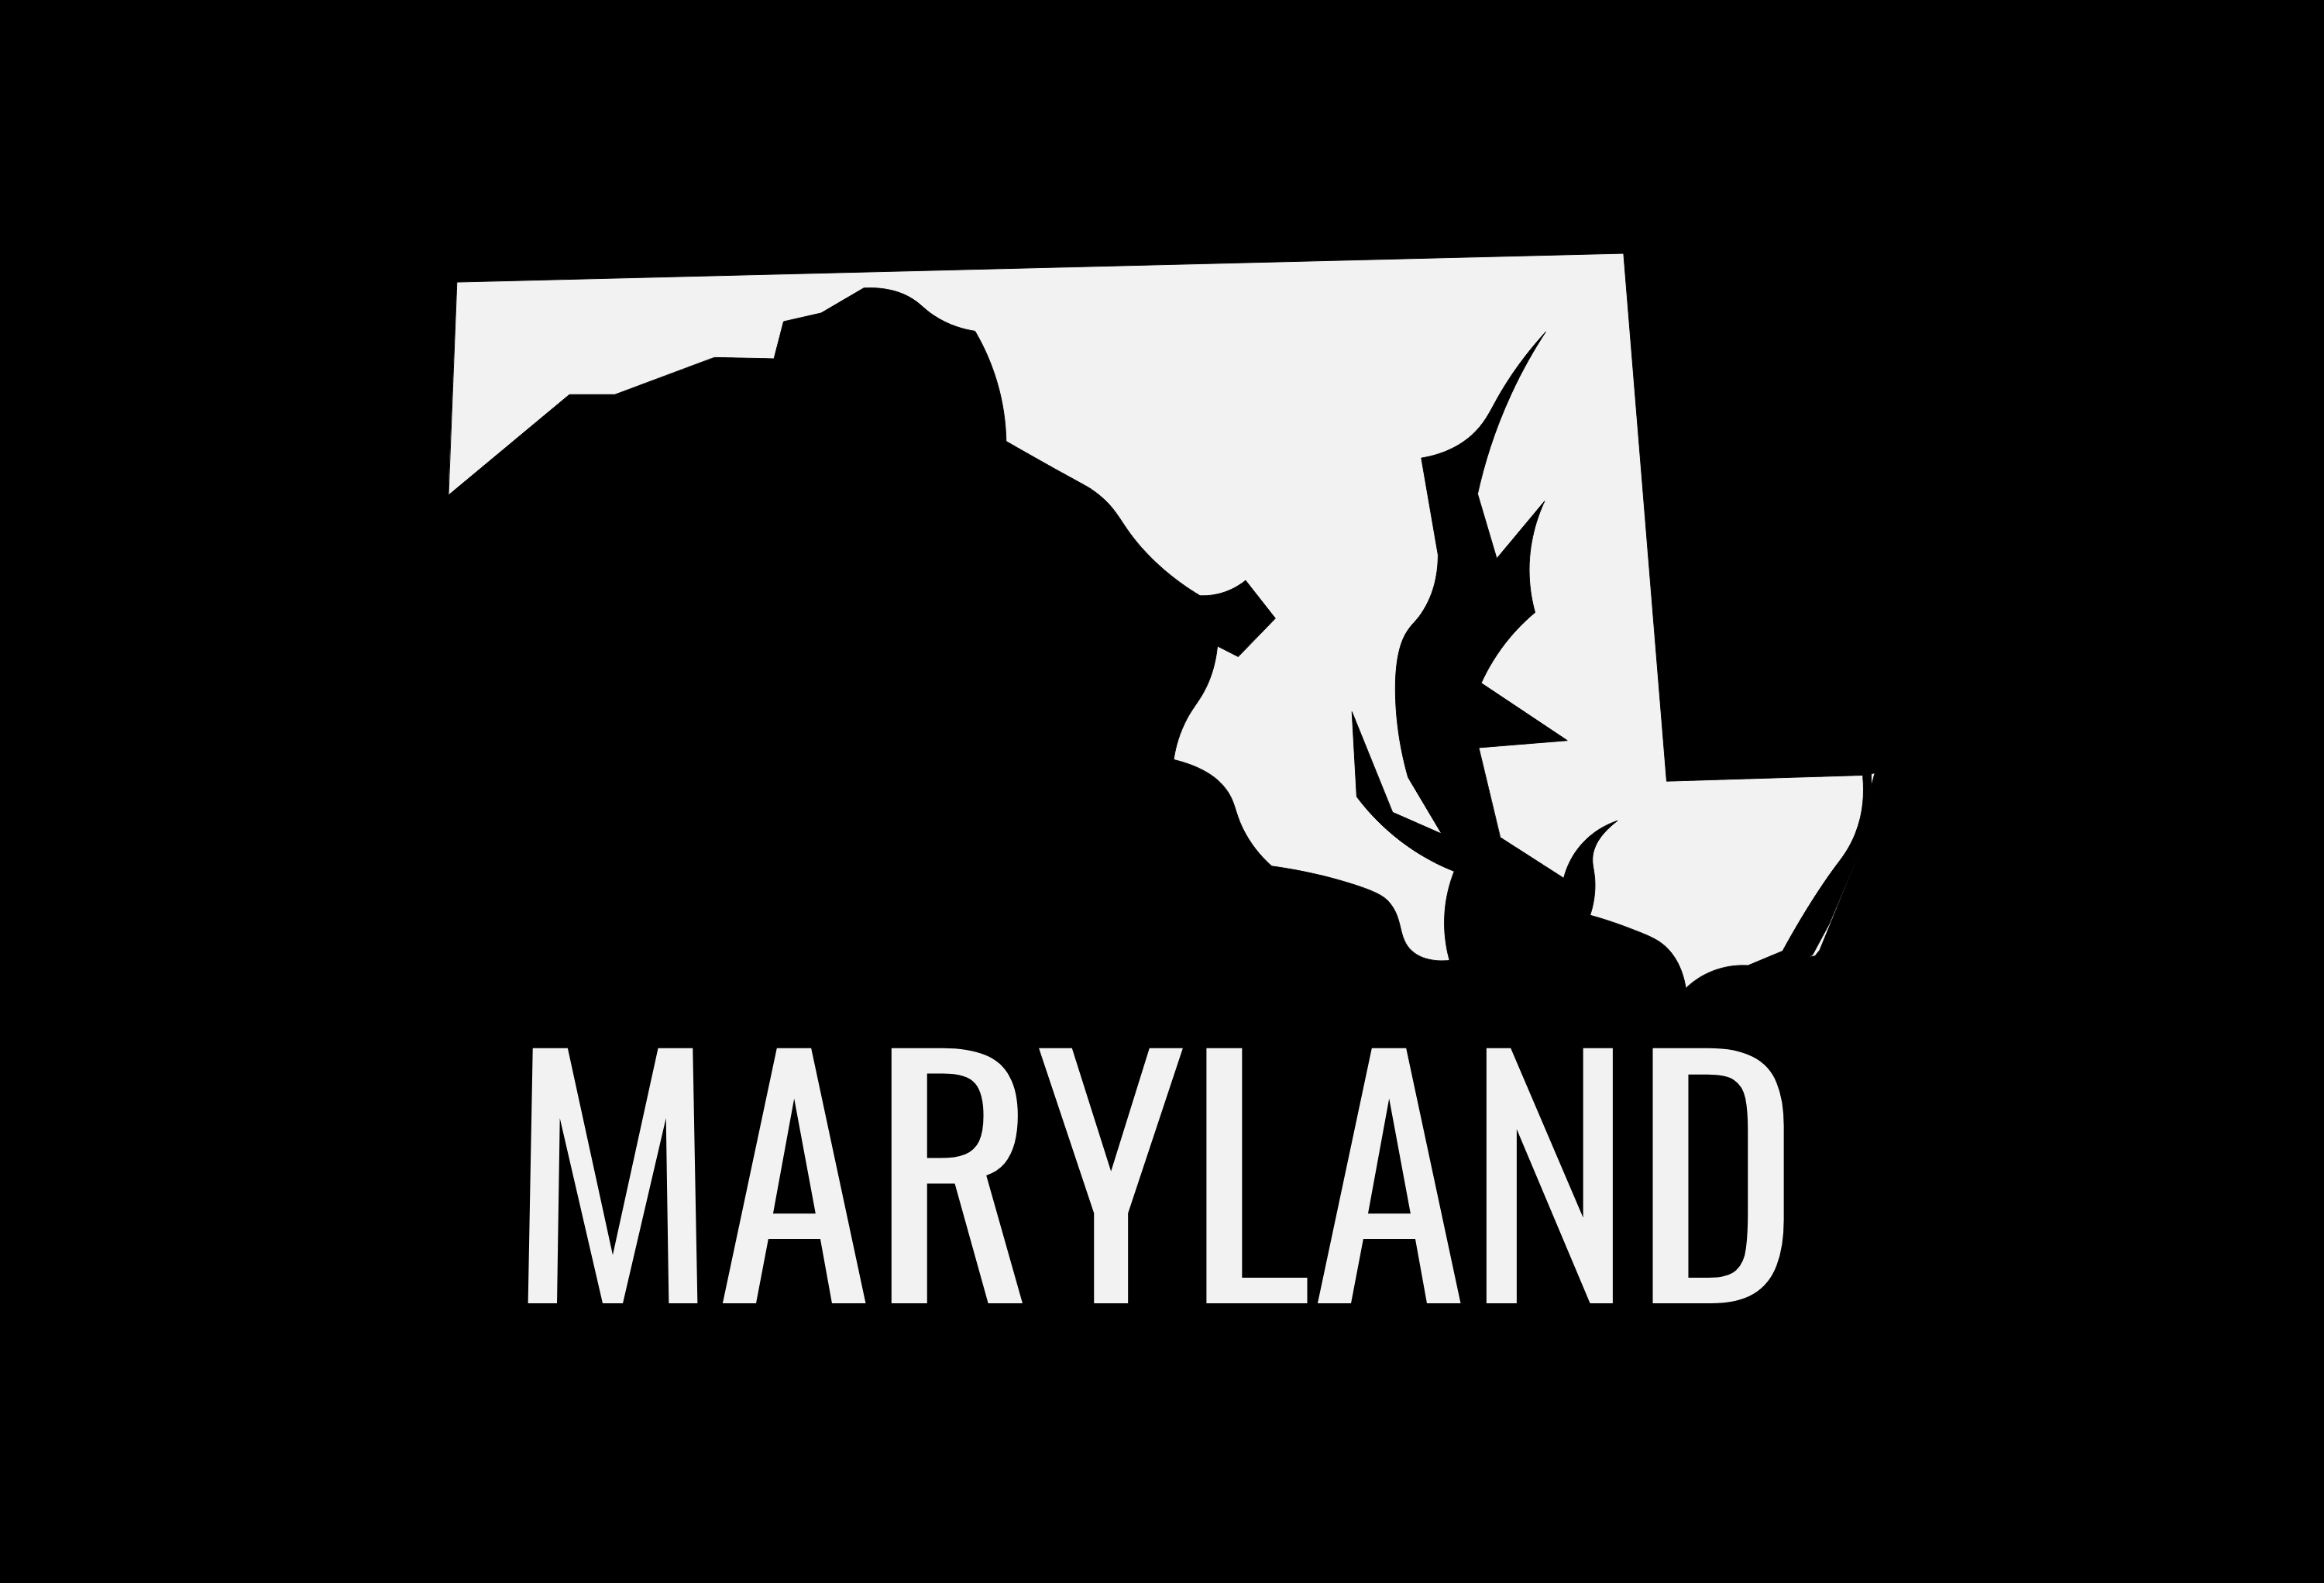 Maryland State Map Car Decal - Permanent Vinyl Sticker for Cars, Vehicle, Doors, Windows, Laptop, and more!